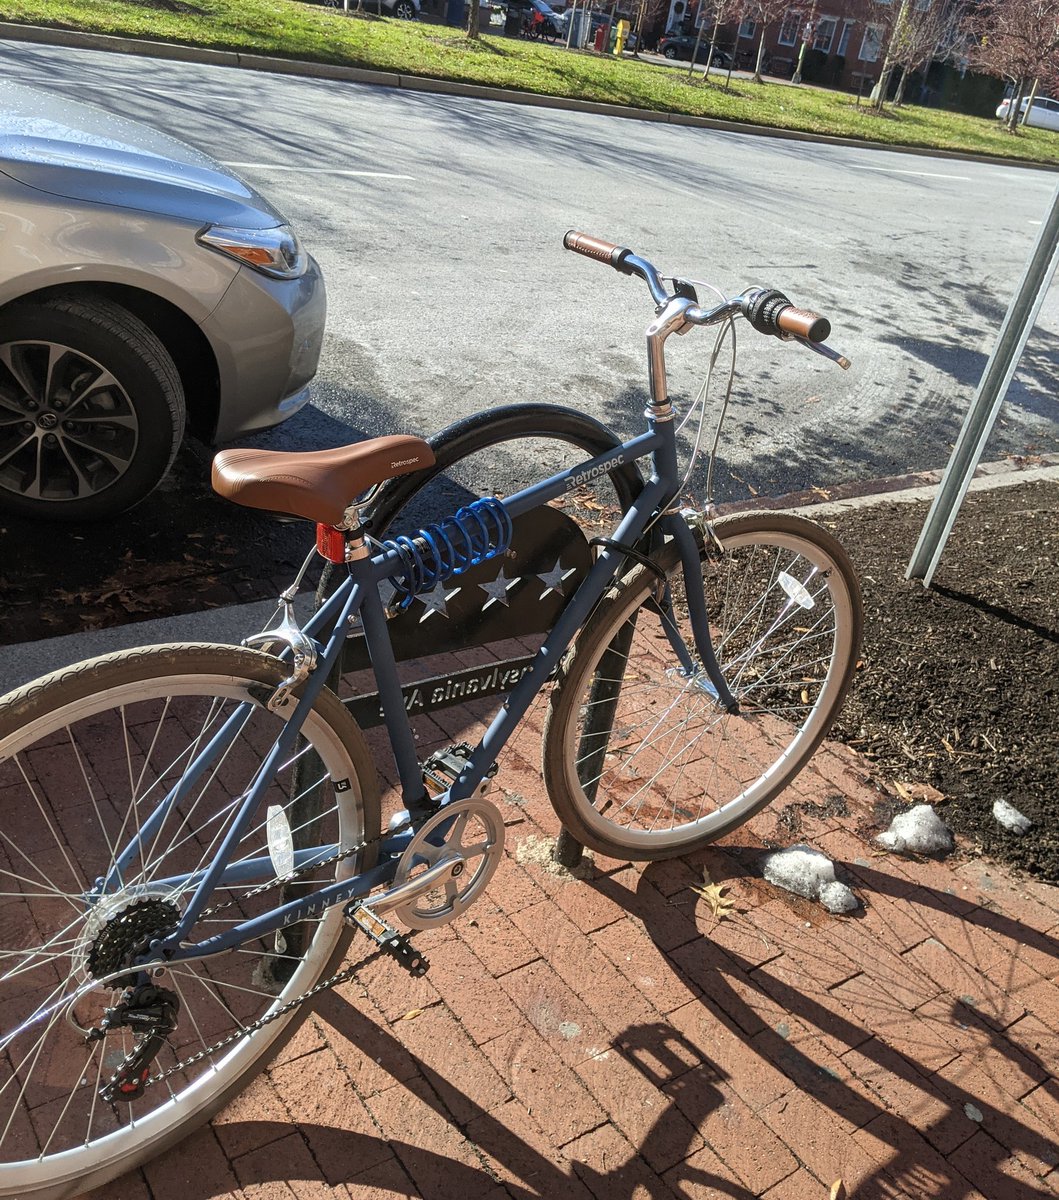 This is now an account for DC commuter bikes in the wild